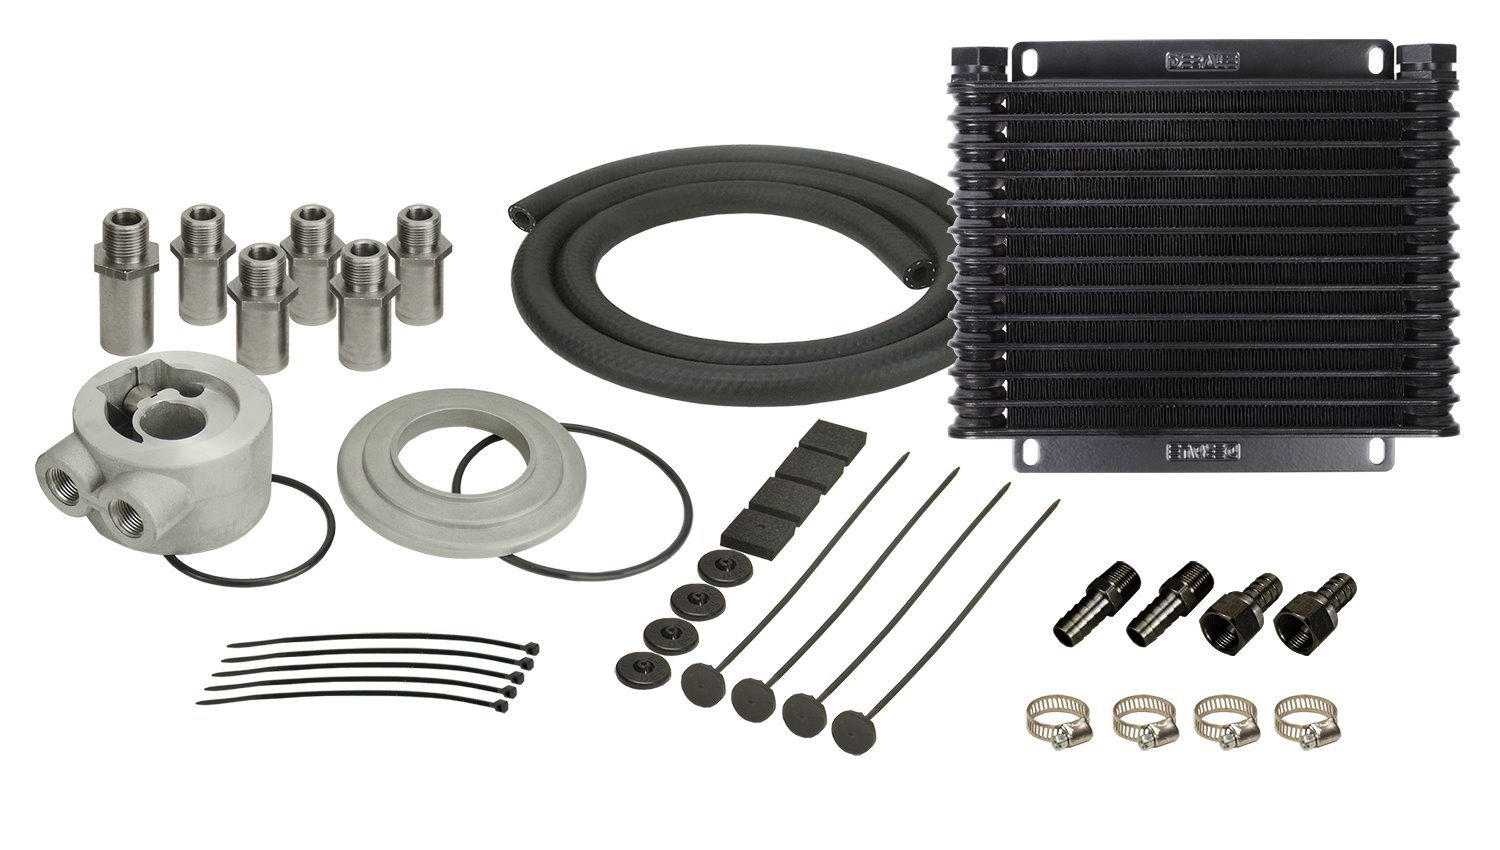 Engine Oil Cooler With Sandwich Adapter Kit Plate & Fin